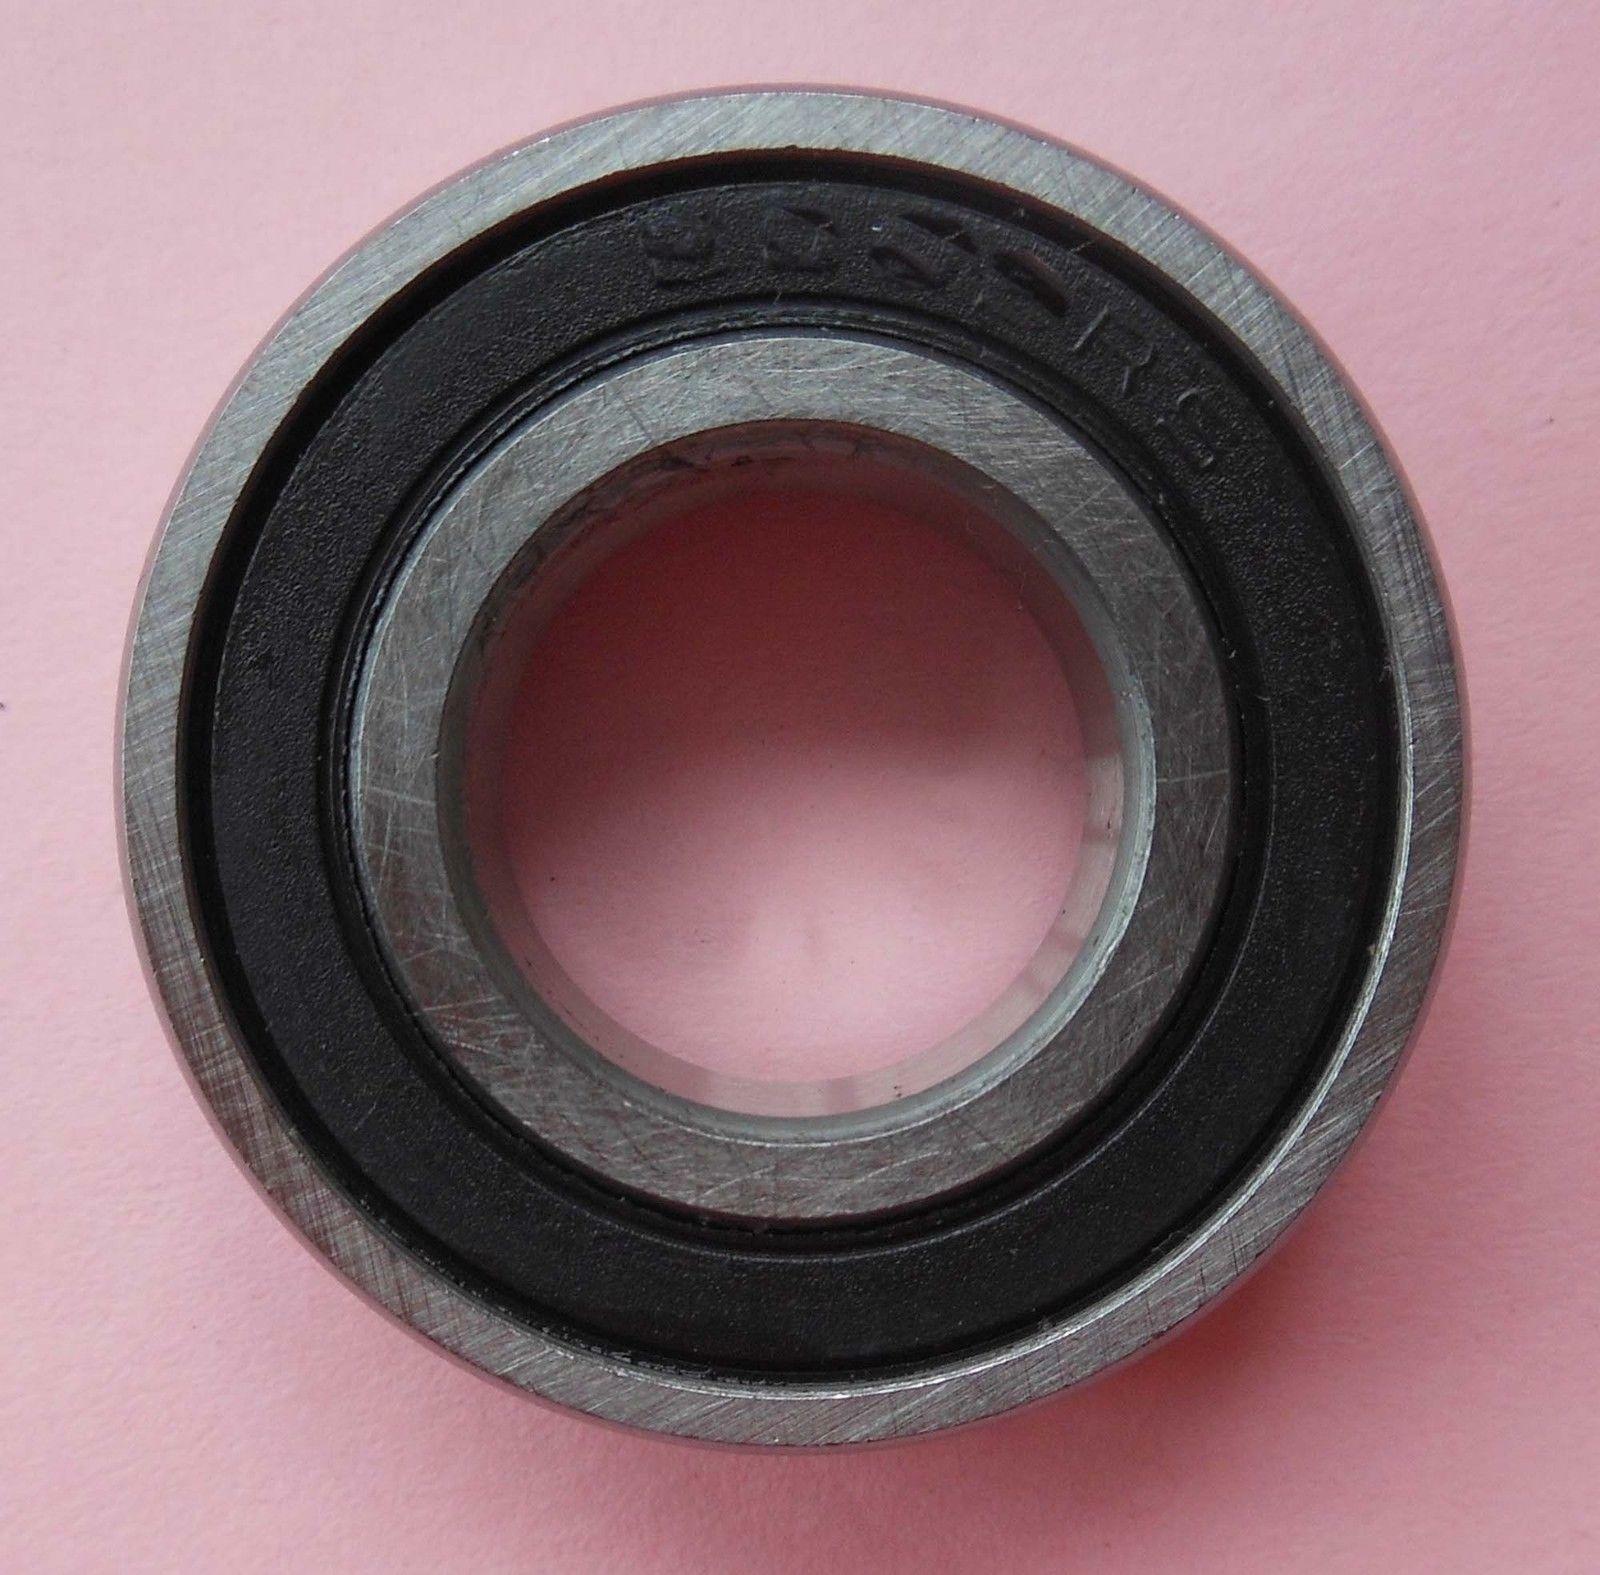 10pcs 6202-2RS 6202RS Rubber Sealed Bearing Beari Ball Miniature Our shop most popular New color